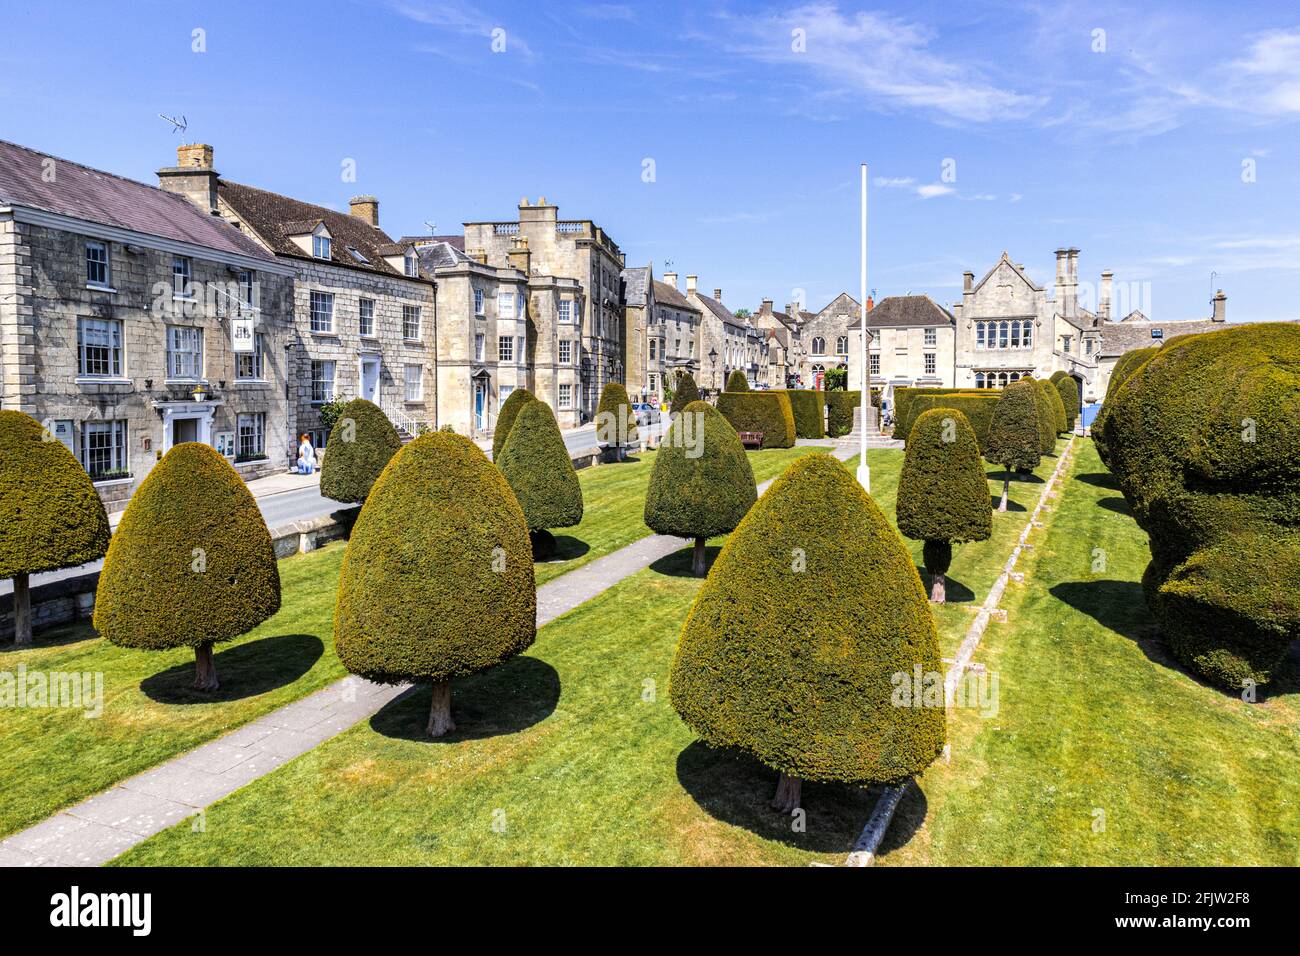 St Marys churchyard with some of its 99 yew trees in the Cotswold village of Painswick, Gloucestershire UK Stock Photo